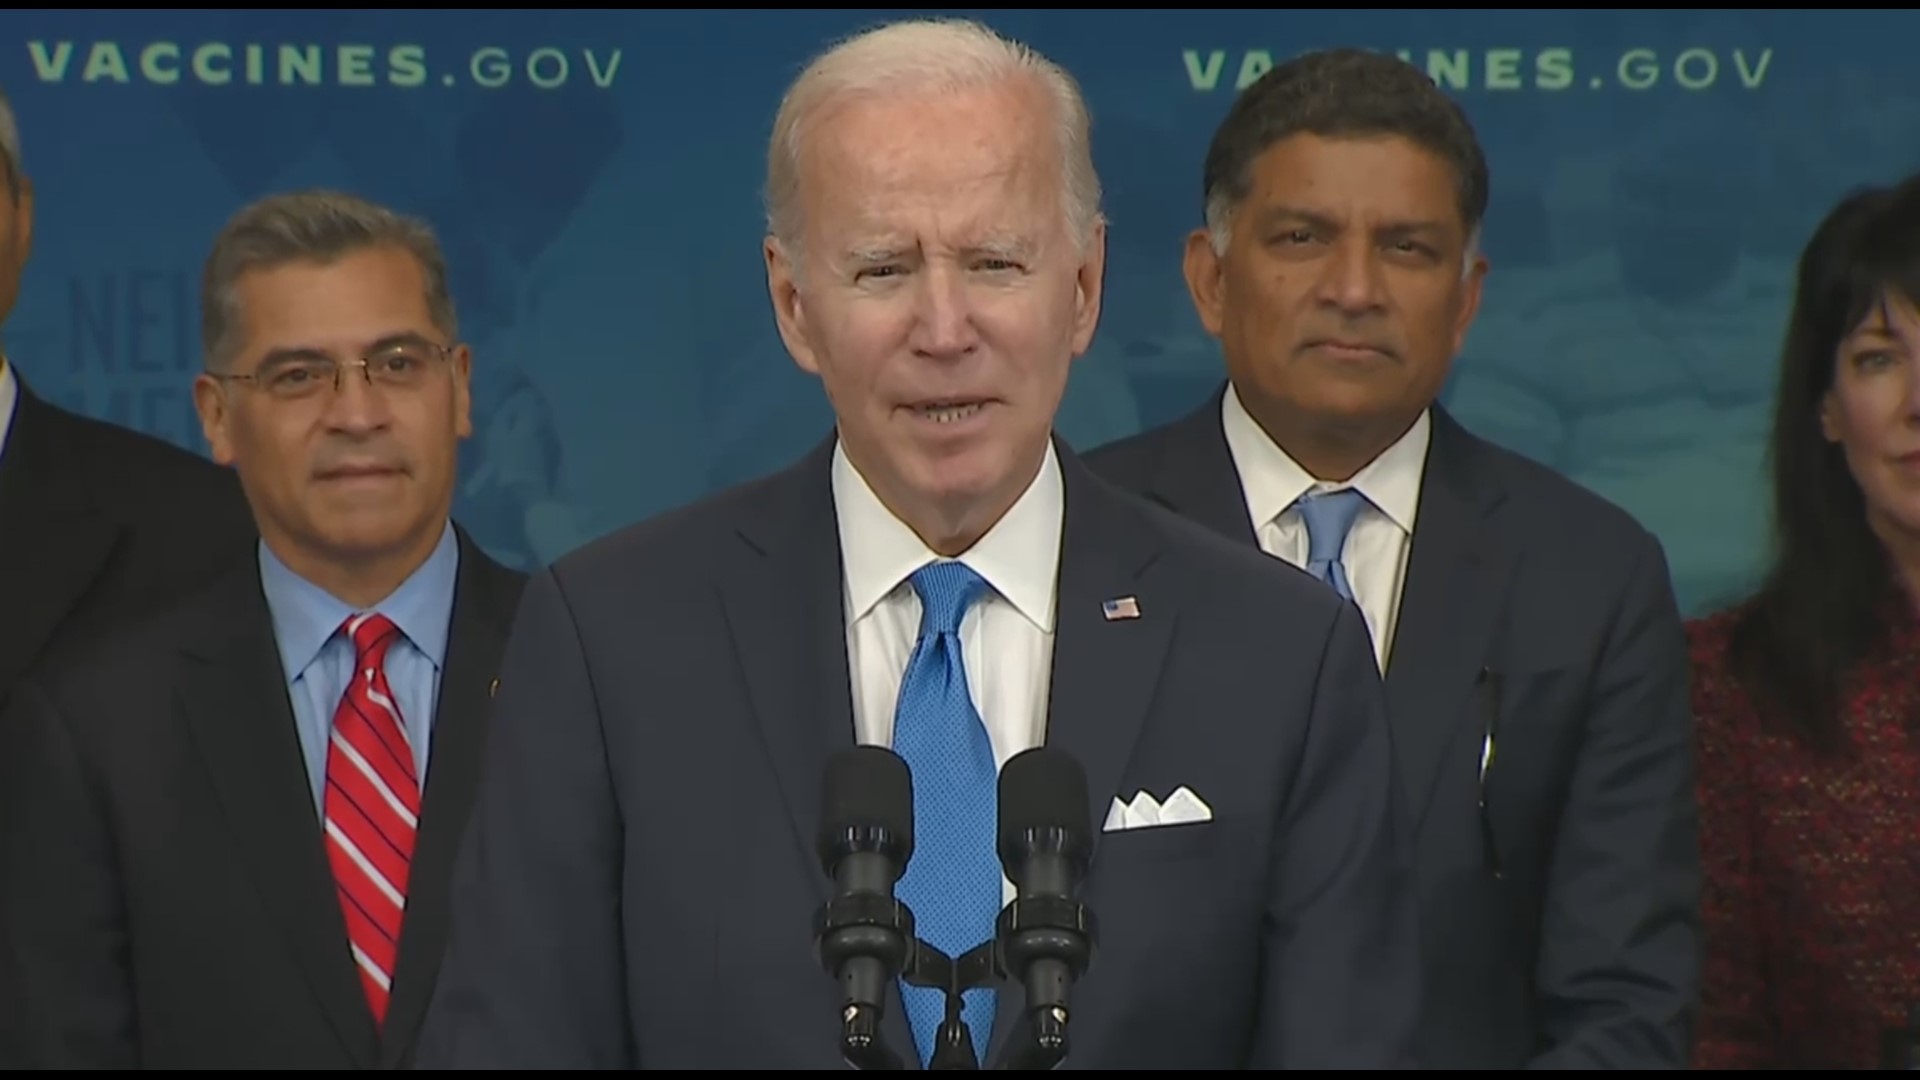 President Joe Biden informed Congress on Monday that he will end the twin national emergencies for addressing COVID-19 on May 11